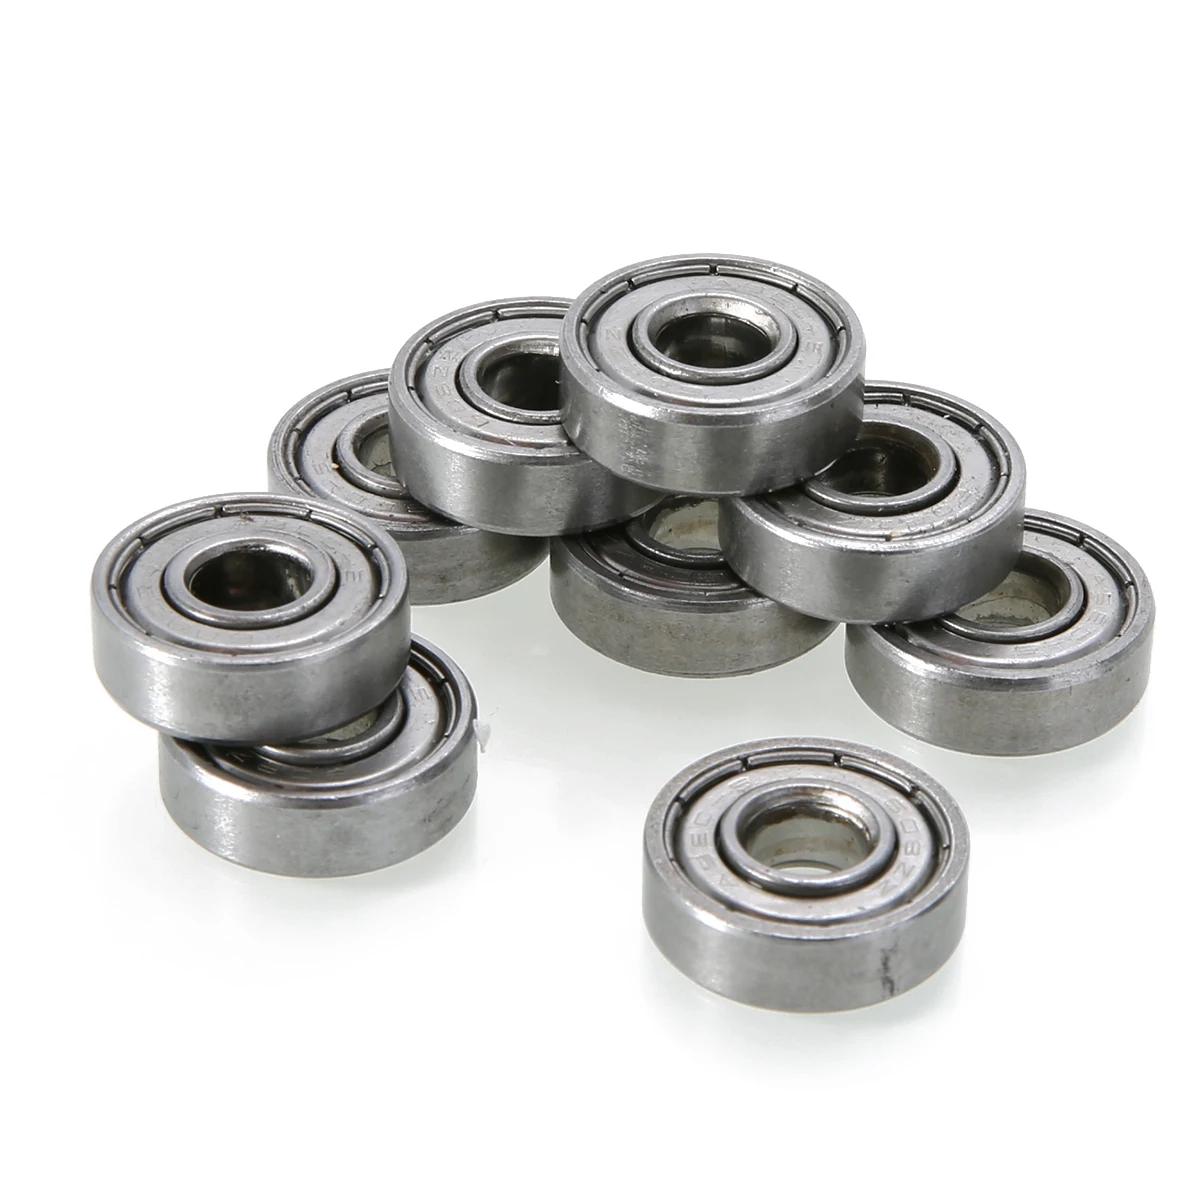 10pcs 608zz Deep Groove Bearing Steel Ball Bearings With Grease For Skateboard Roller Blade Scooter Inline Skating Mayitr